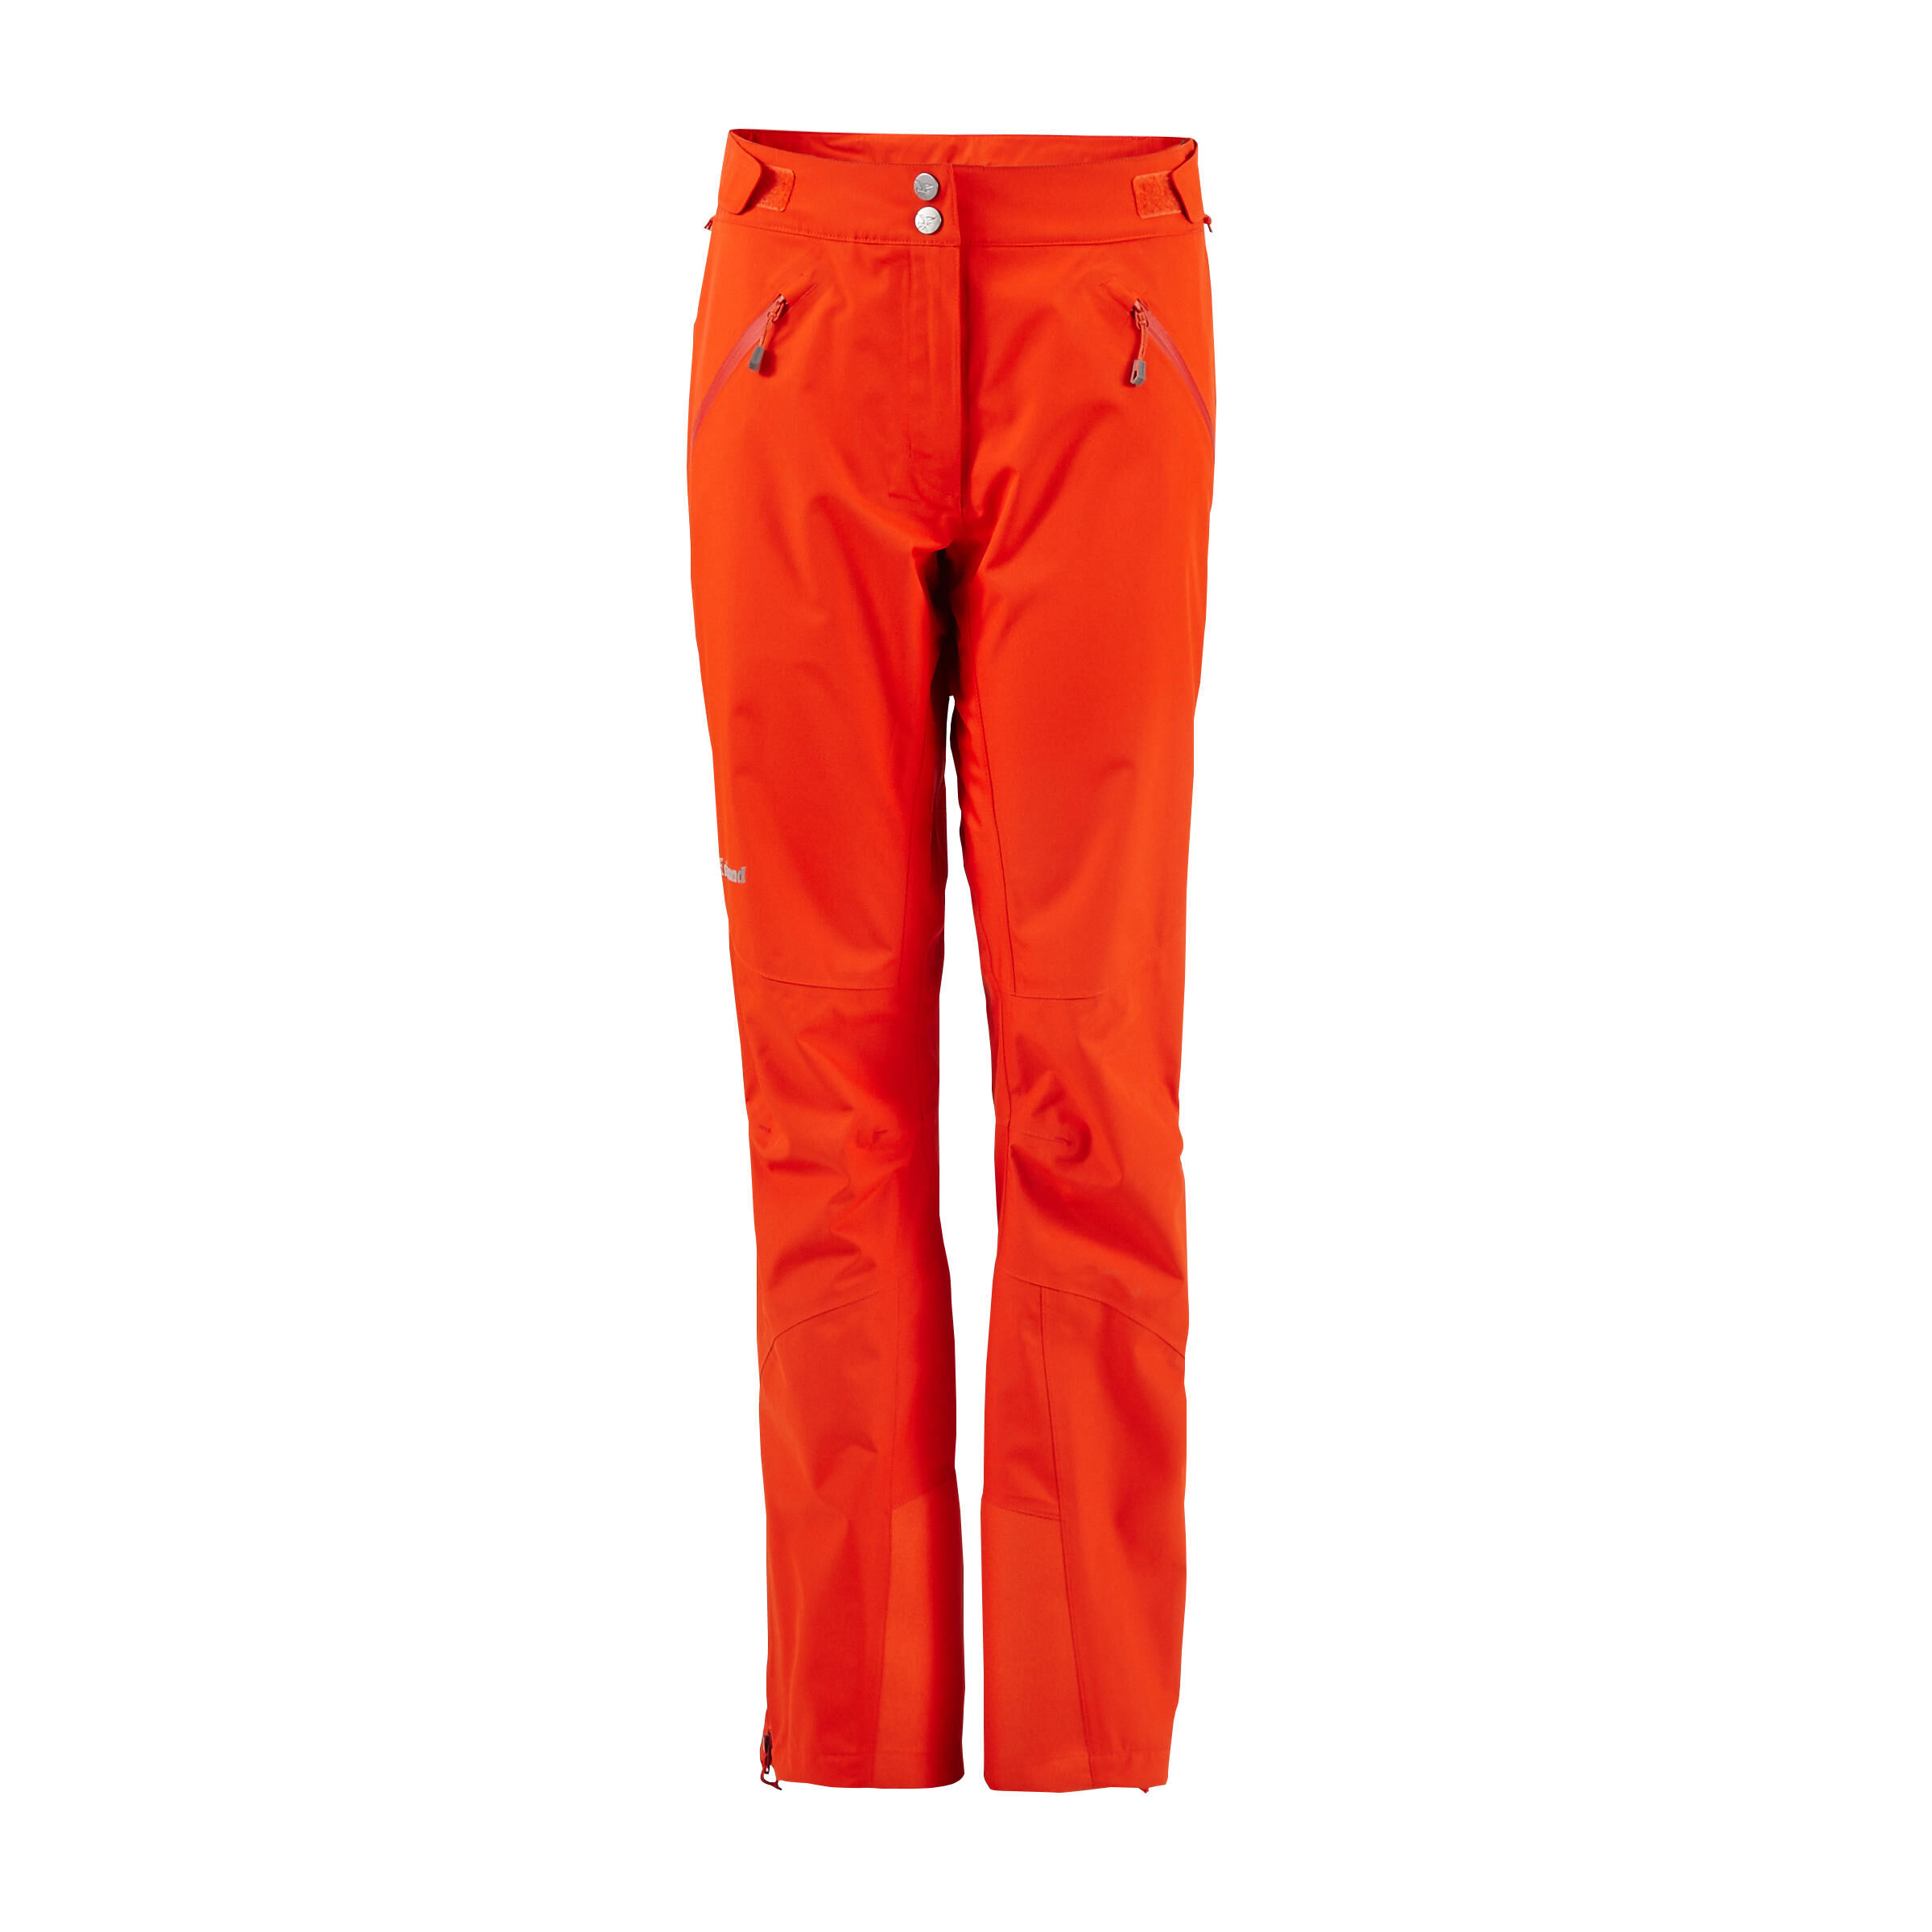 SIMOND Women's Mountaineering Waterproof Overtrousers - Alpinism Red